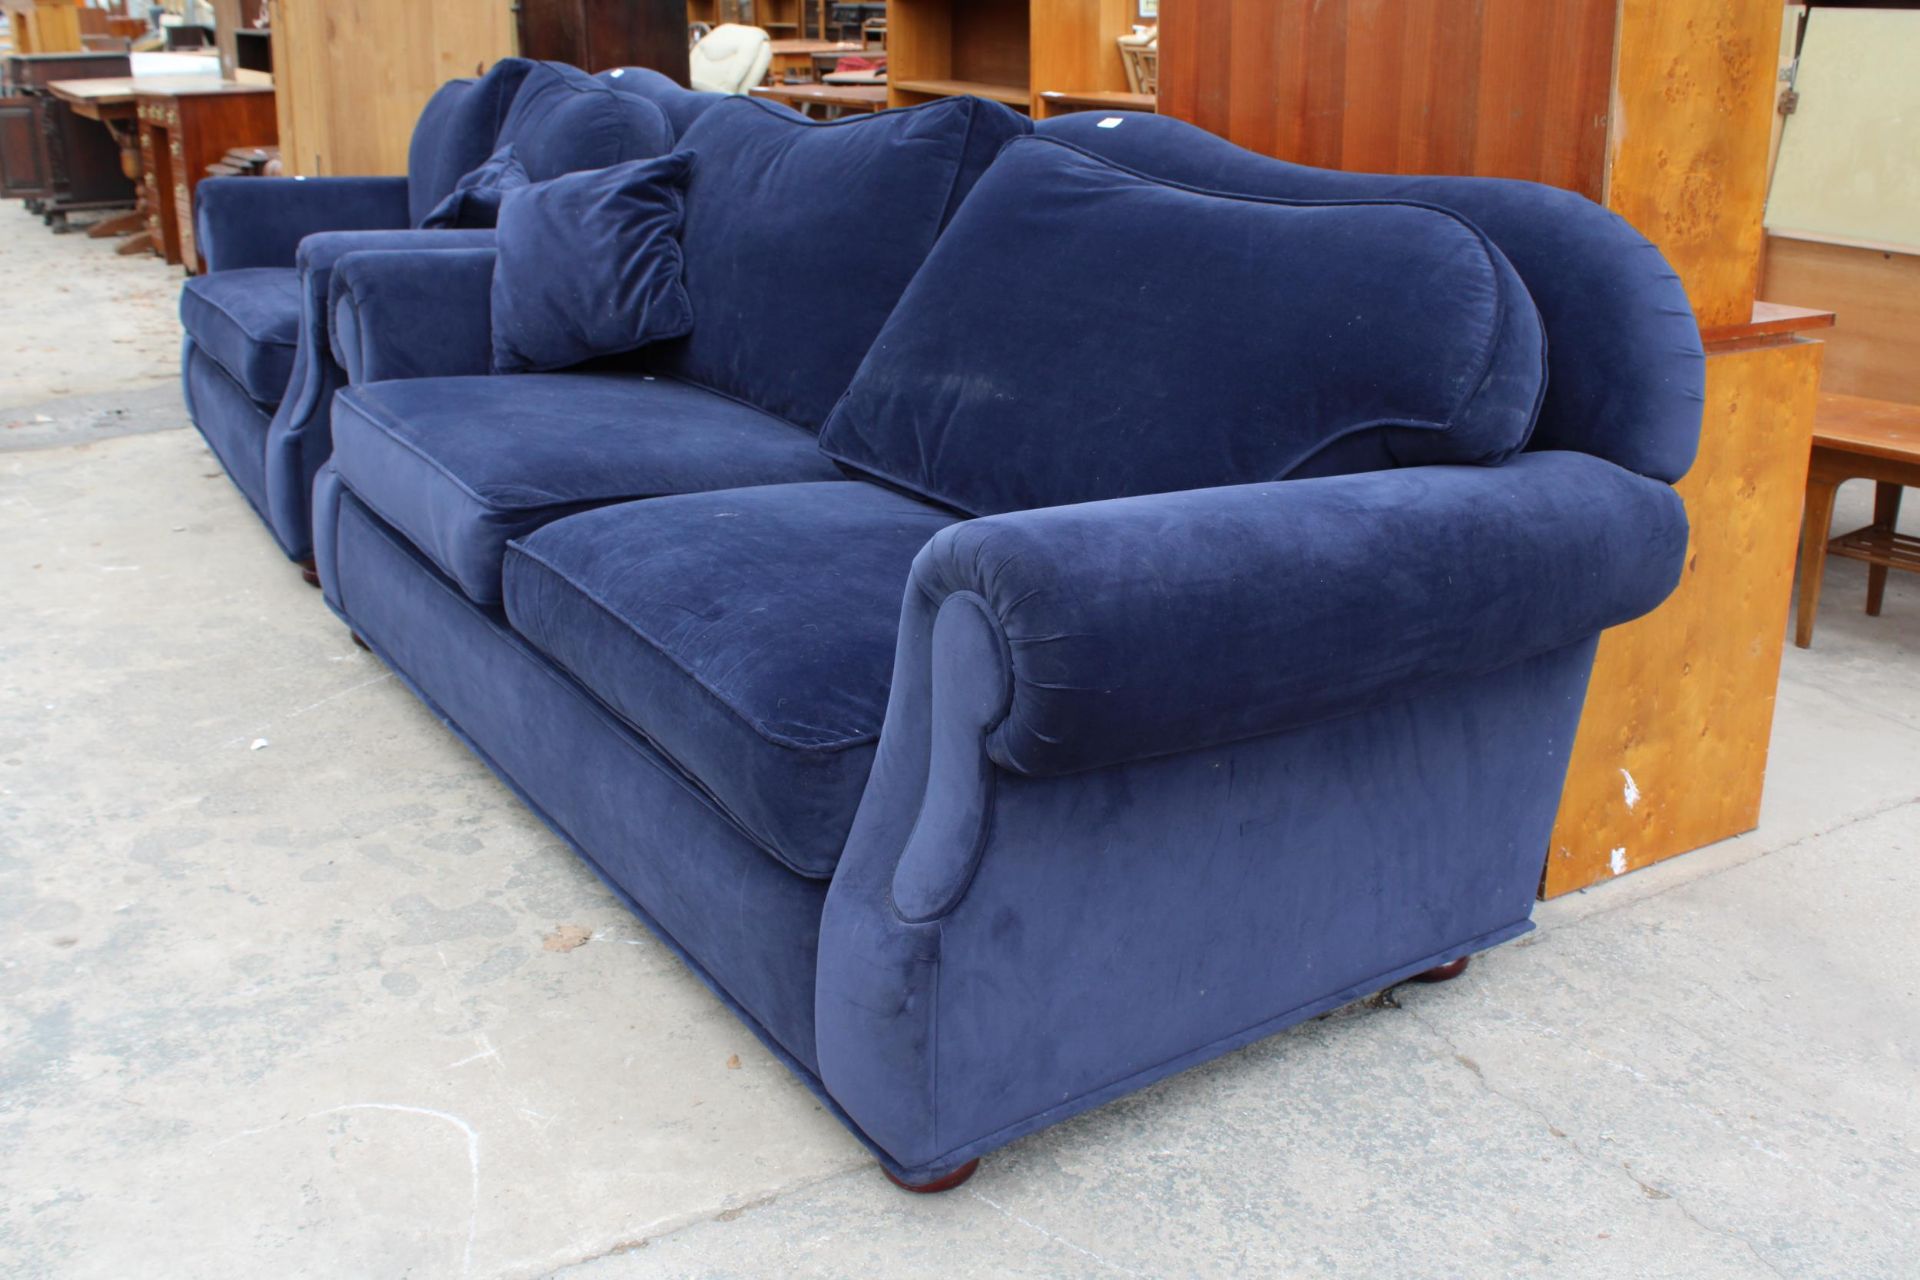 A MODERN BLUE THREE SEATER SETTEE WITH SPRUNG EDGE - Image 2 of 2